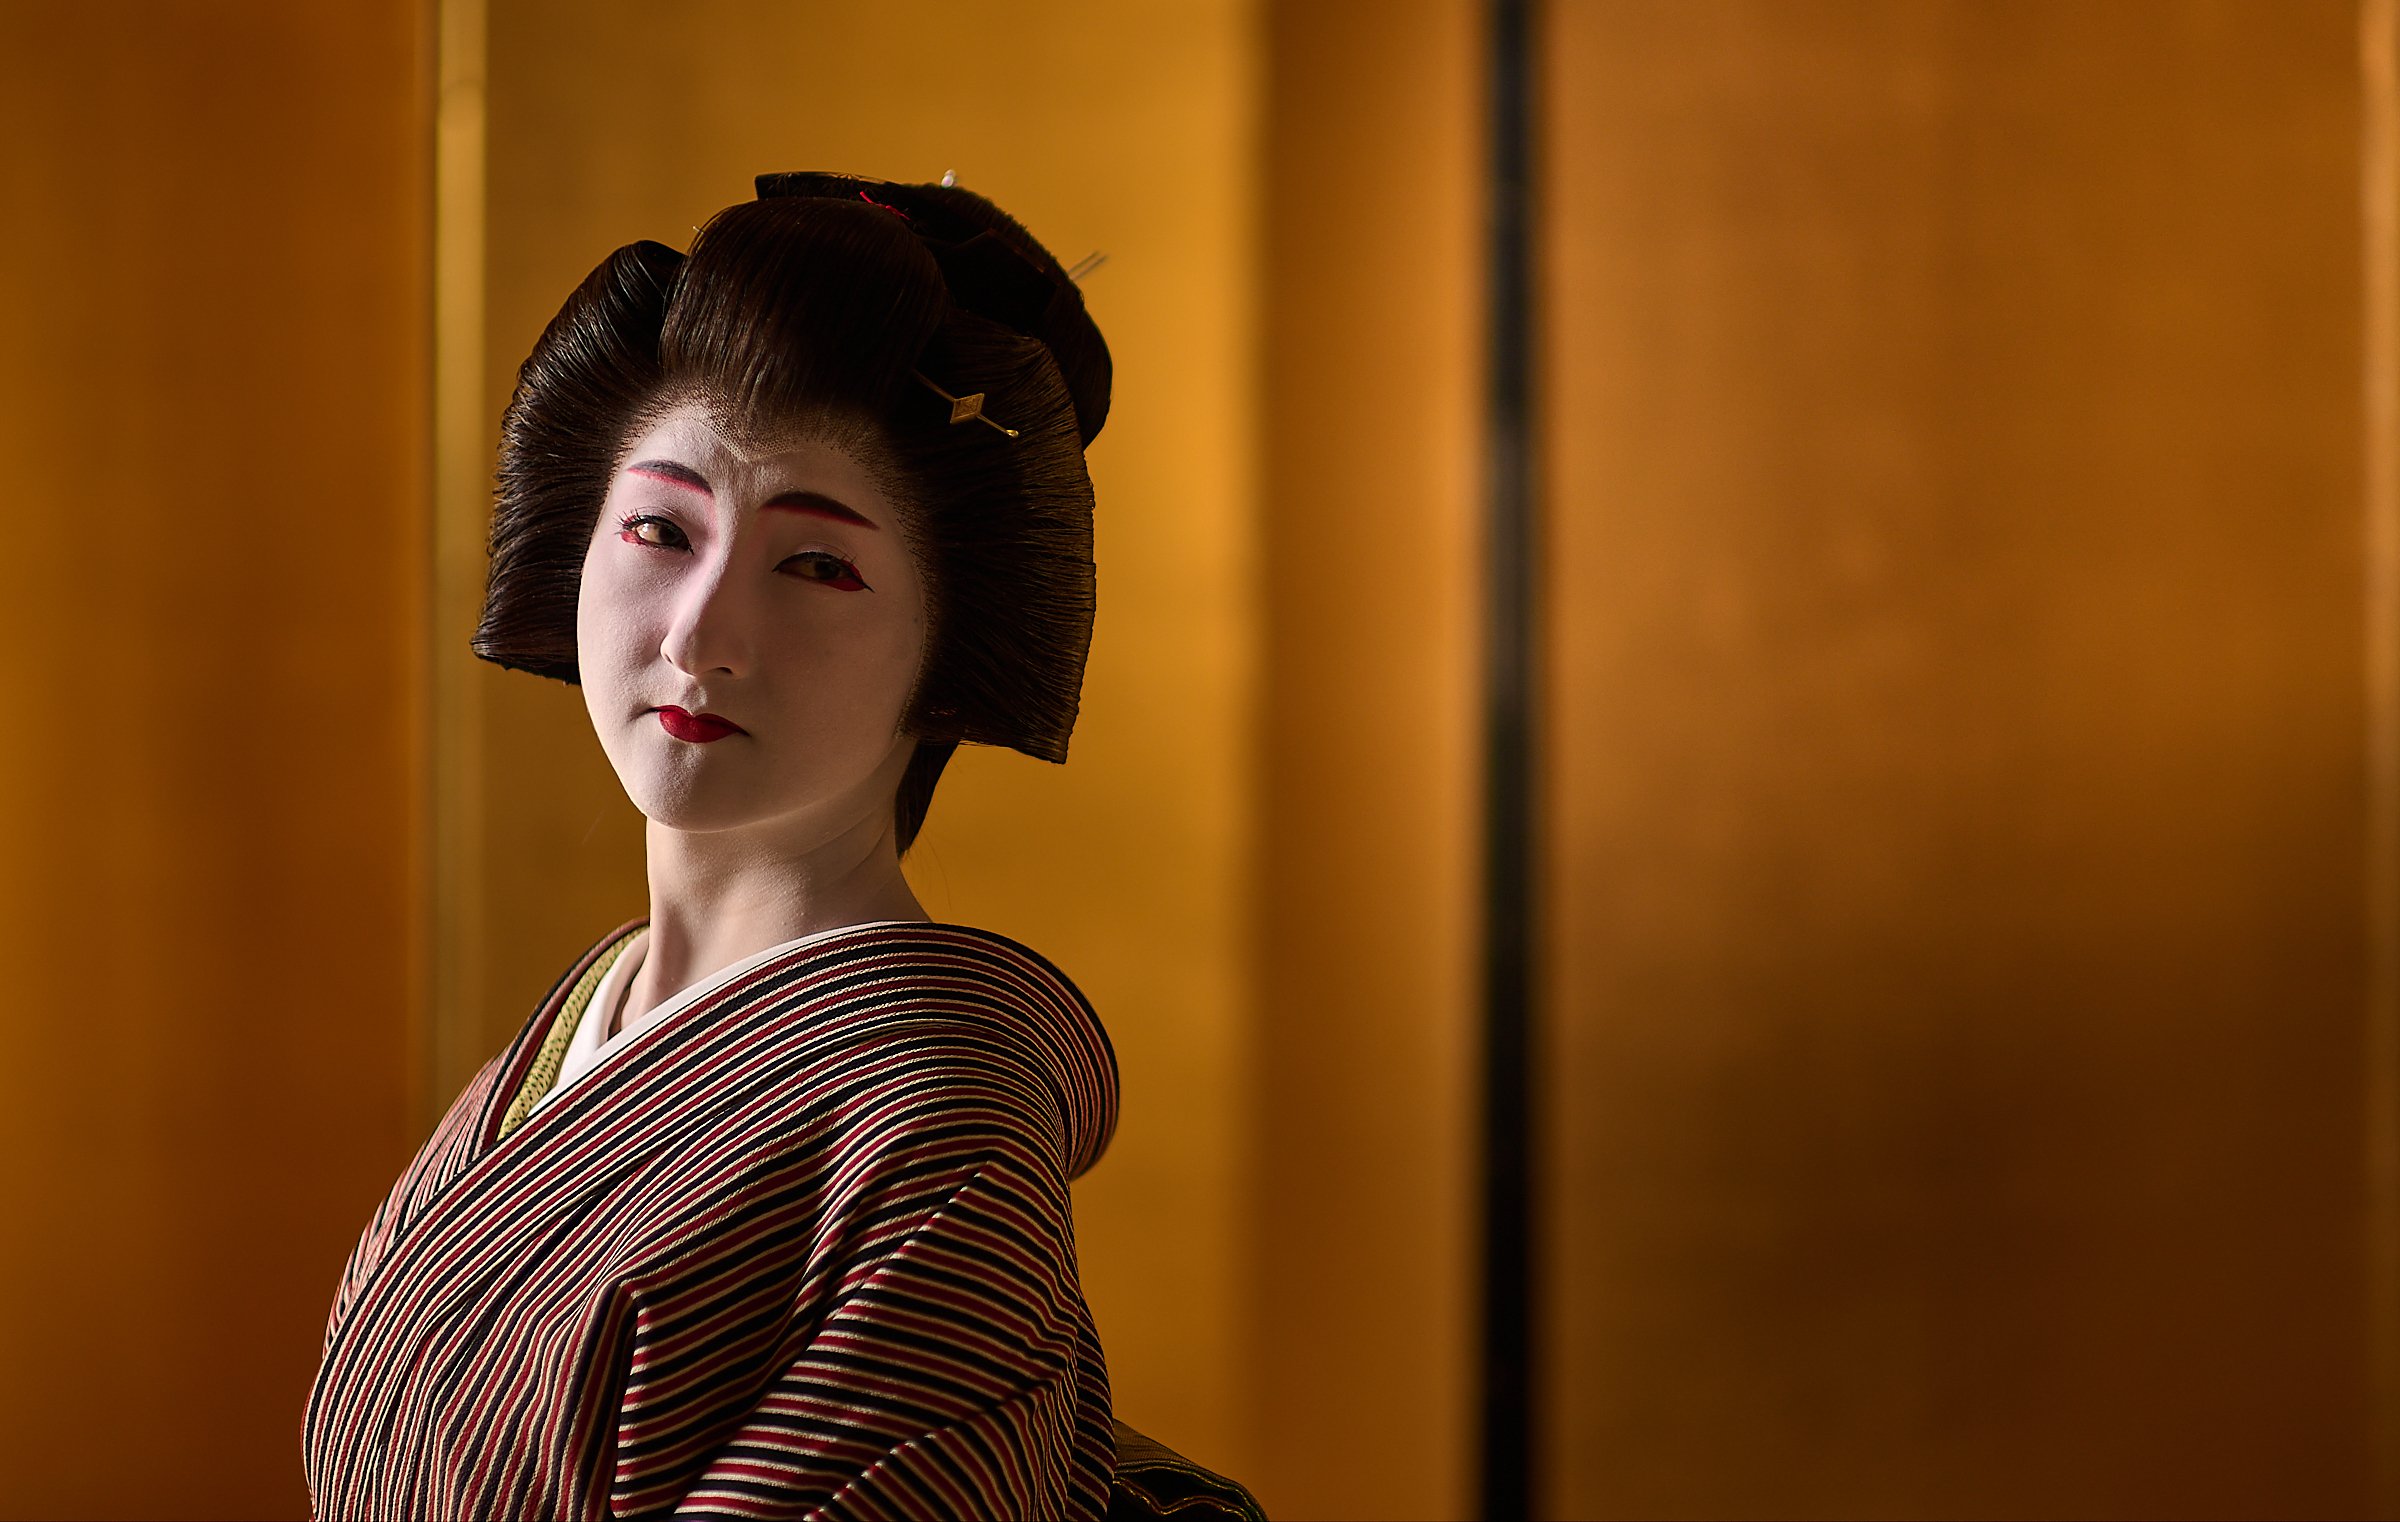 Geishas are the epitome of elegance and grace in everything they do, even a simple tilt of the head